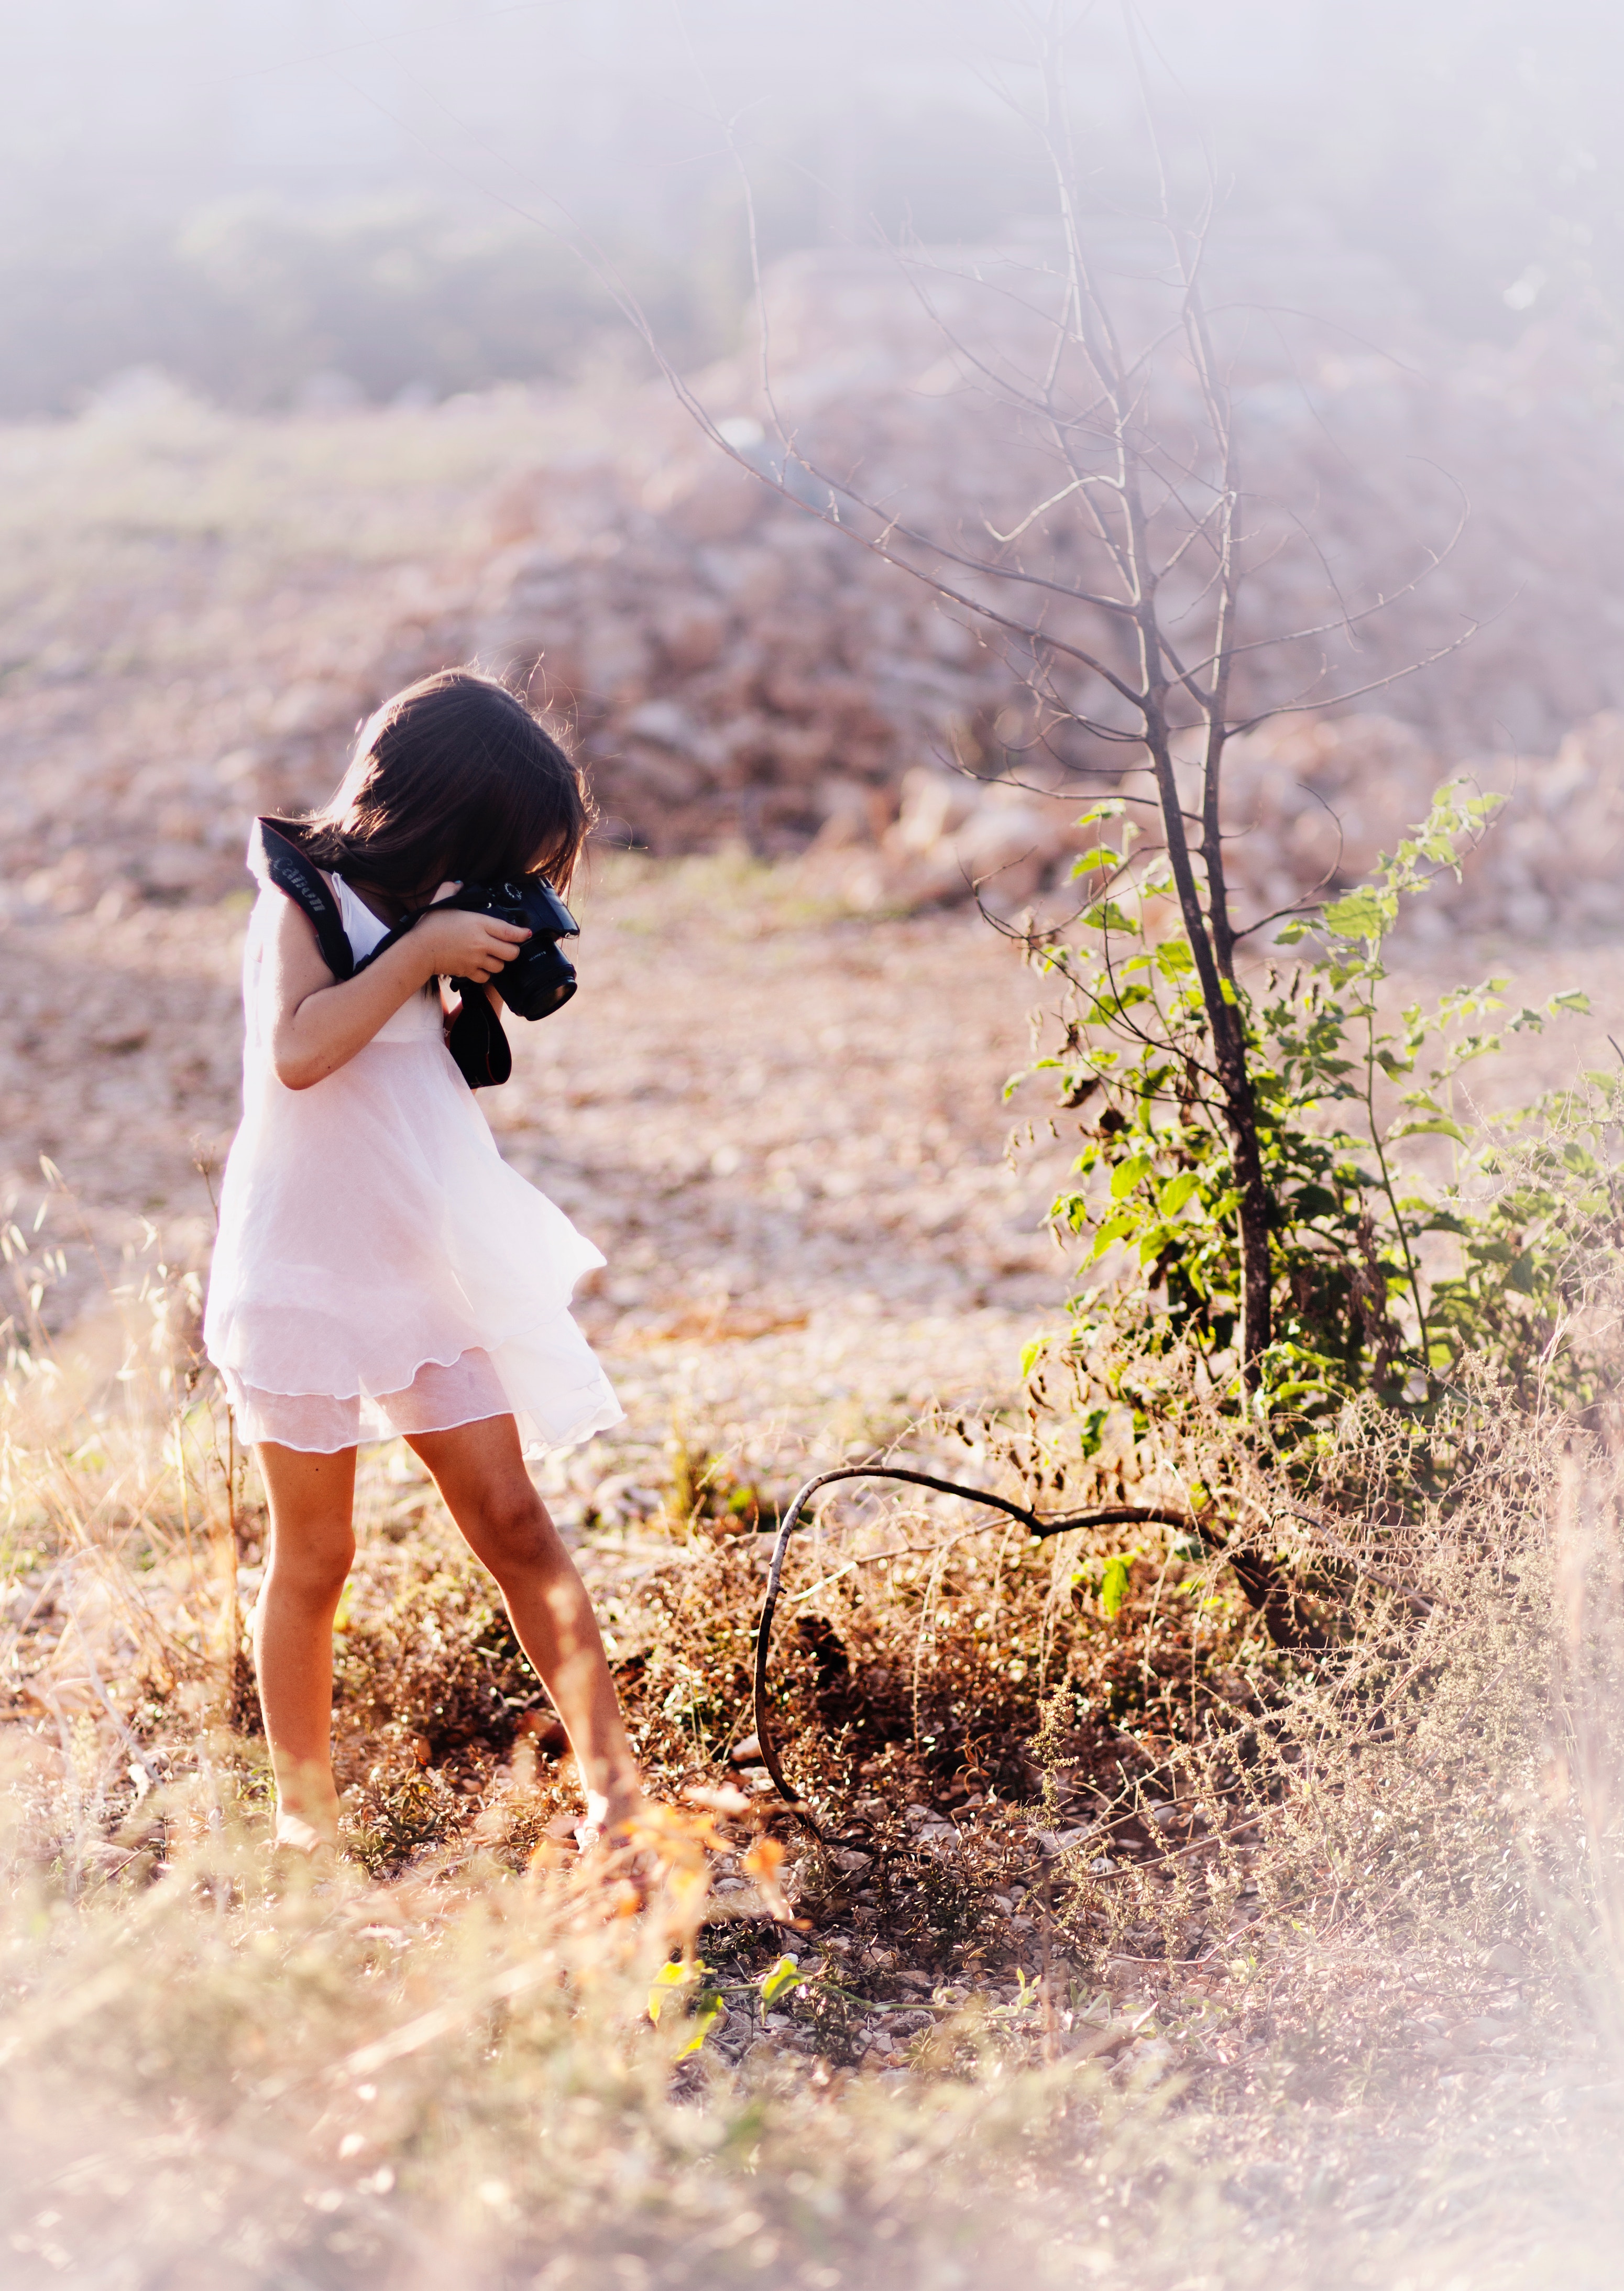 Brown-haired girl in diaphanous white dress using real camera to photograph something near the ground, standing in a field of dry grass.